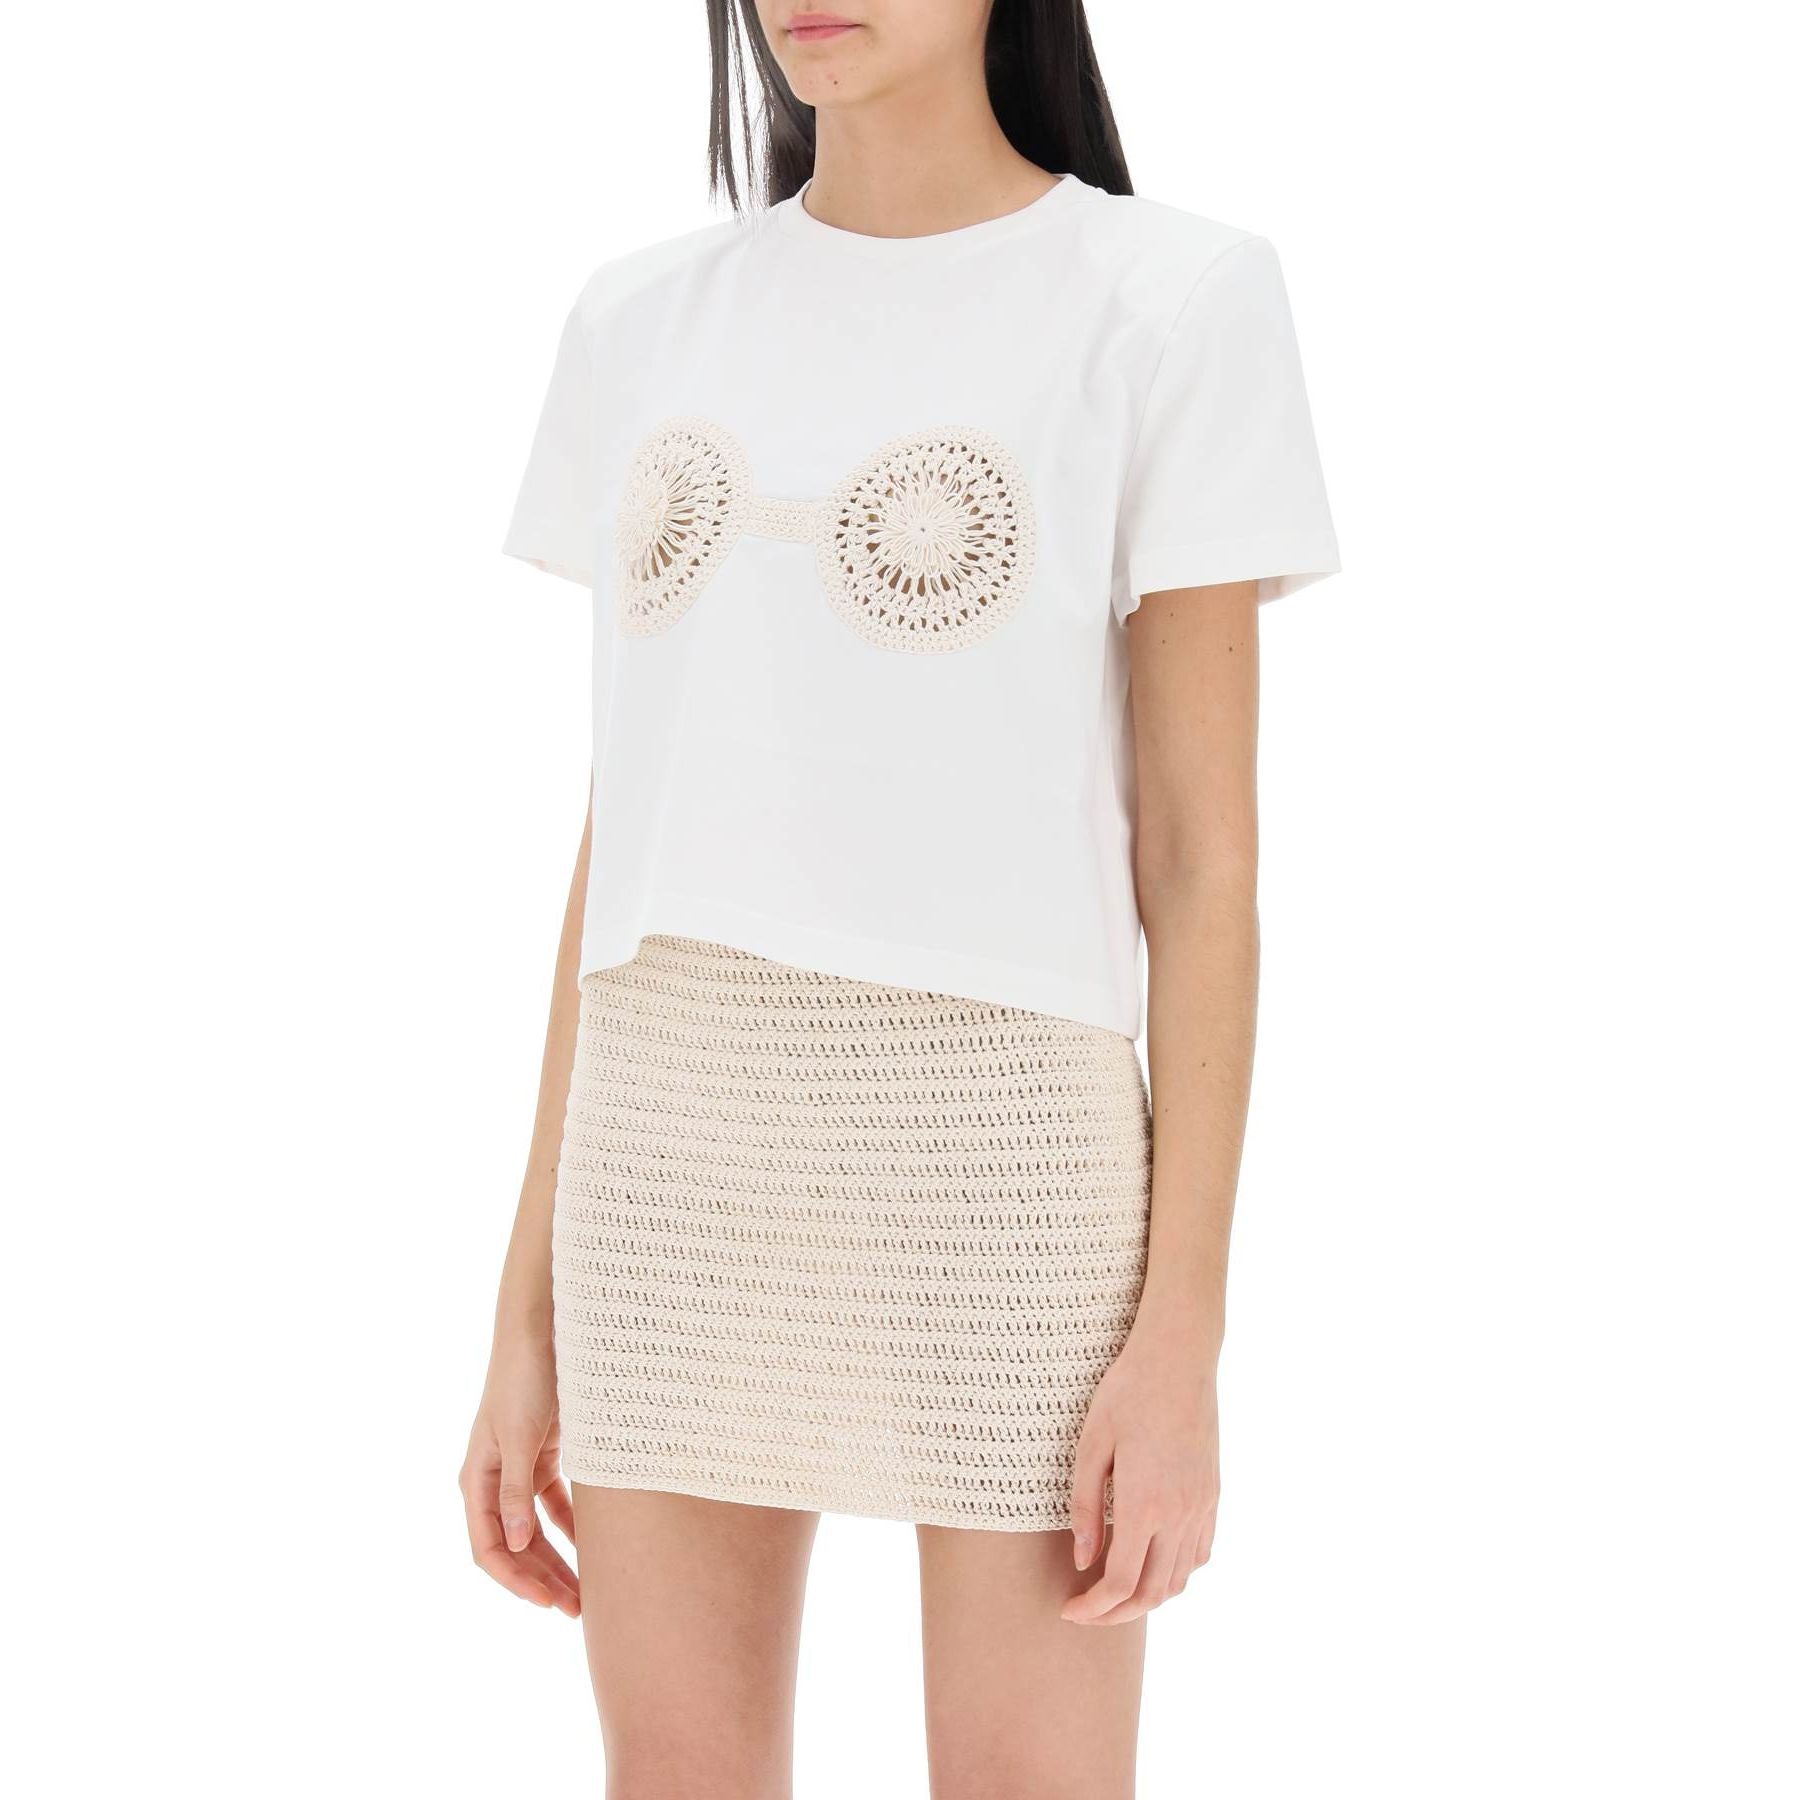 Cropped T Shirt With Crochet Insert